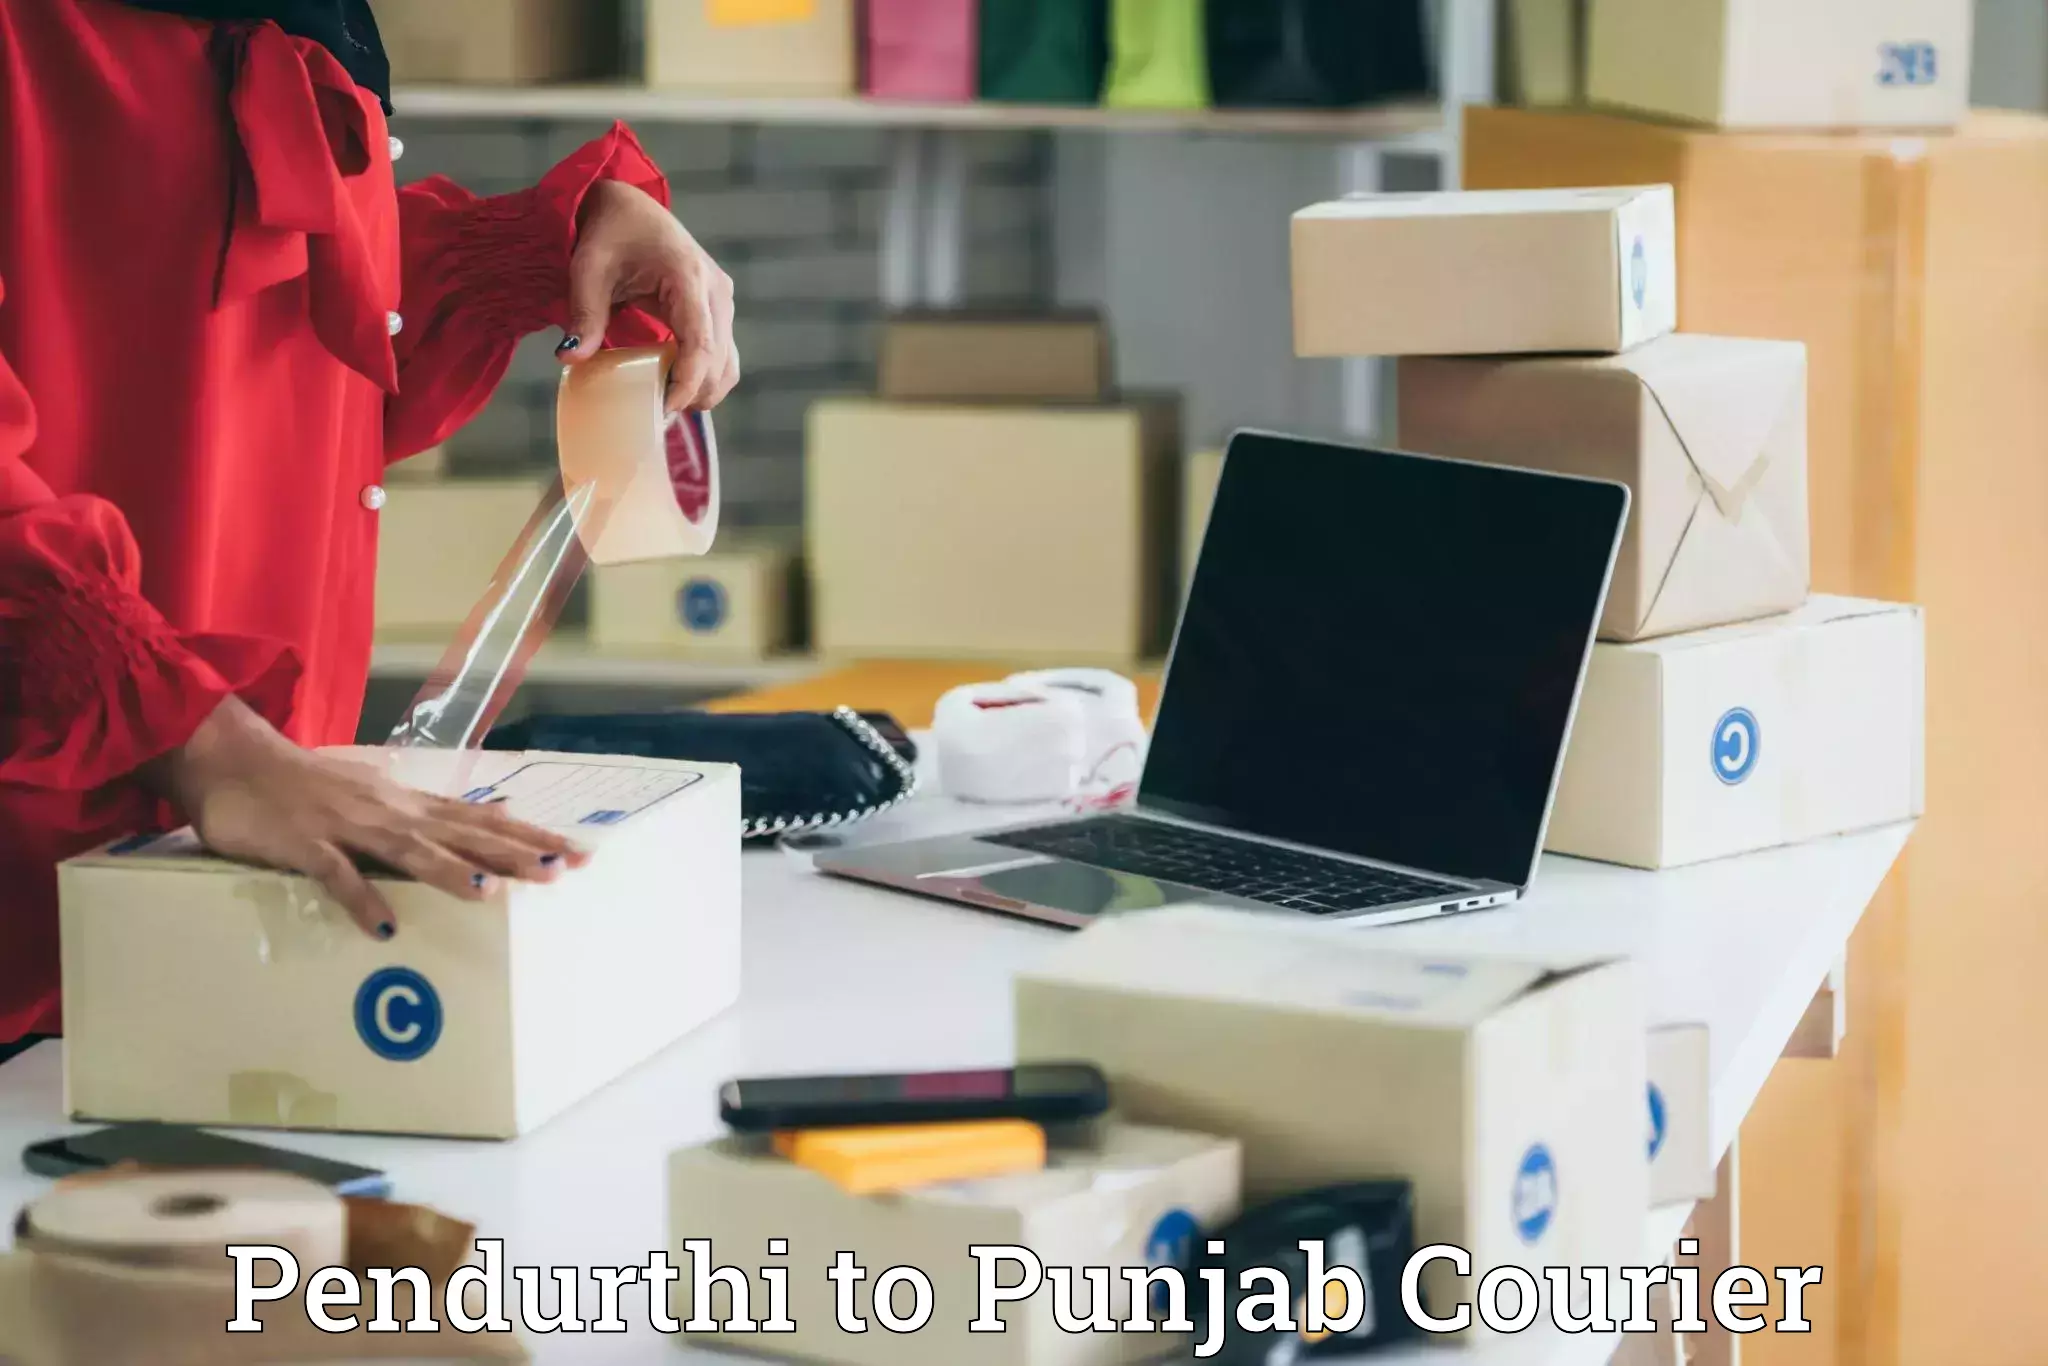 Comprehensive shipping network Pendurthi to Sultanpur Lodhi